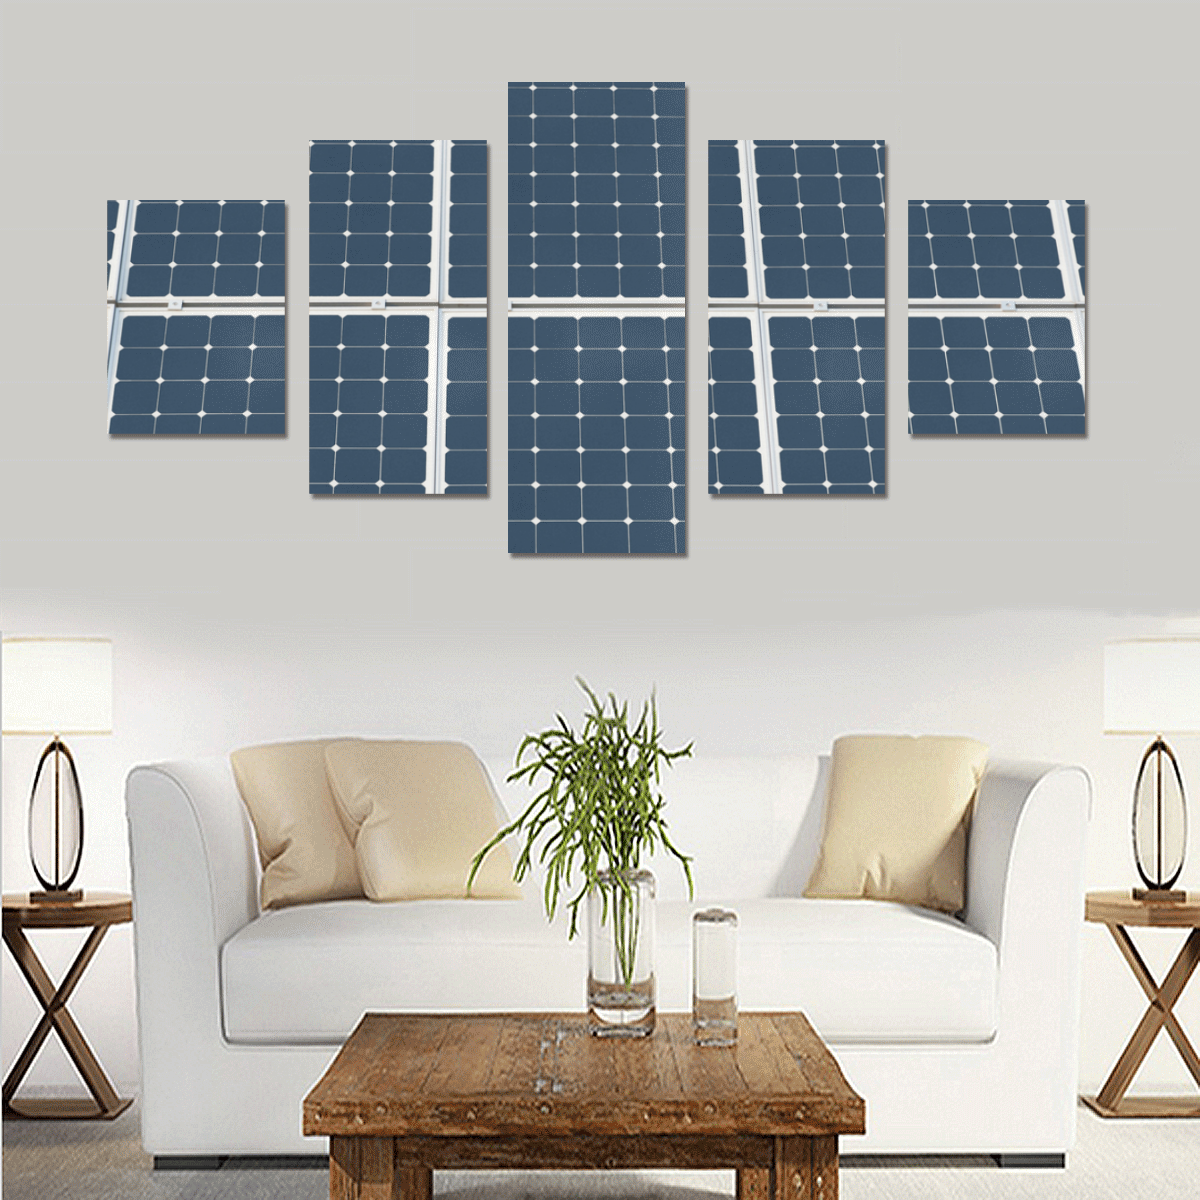 Solar Technology Power Panel Battery Photovoltaic Canvas Print Sets B (No Frame)